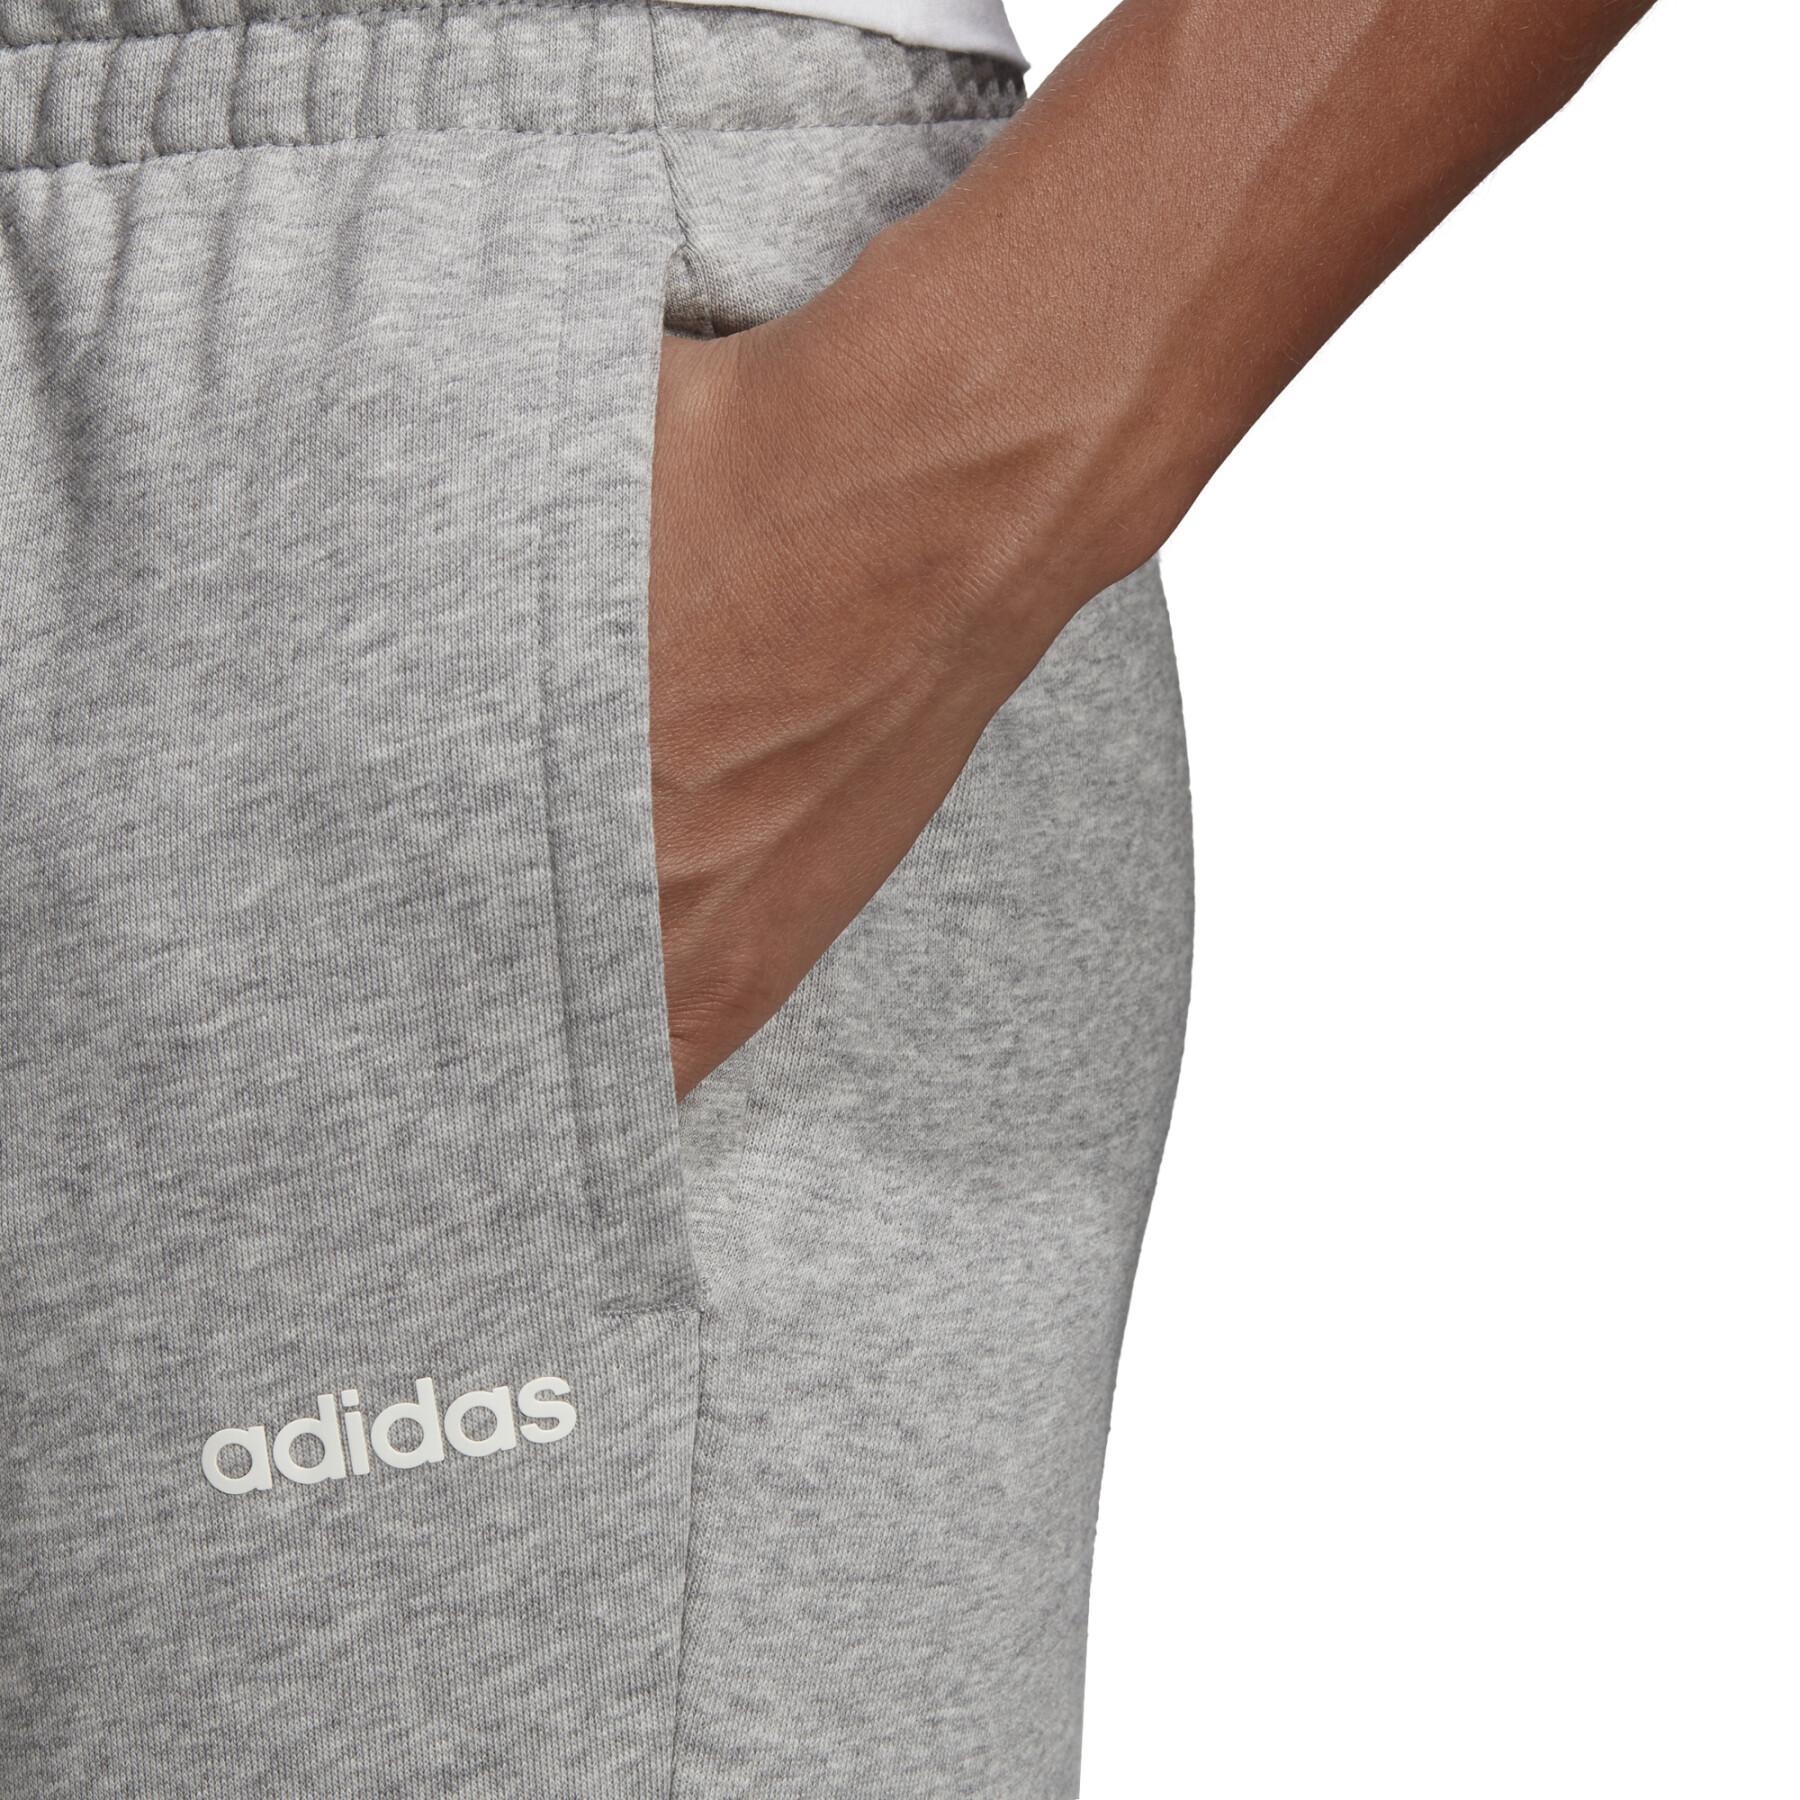 Women's trousers adidas Essentials Solid